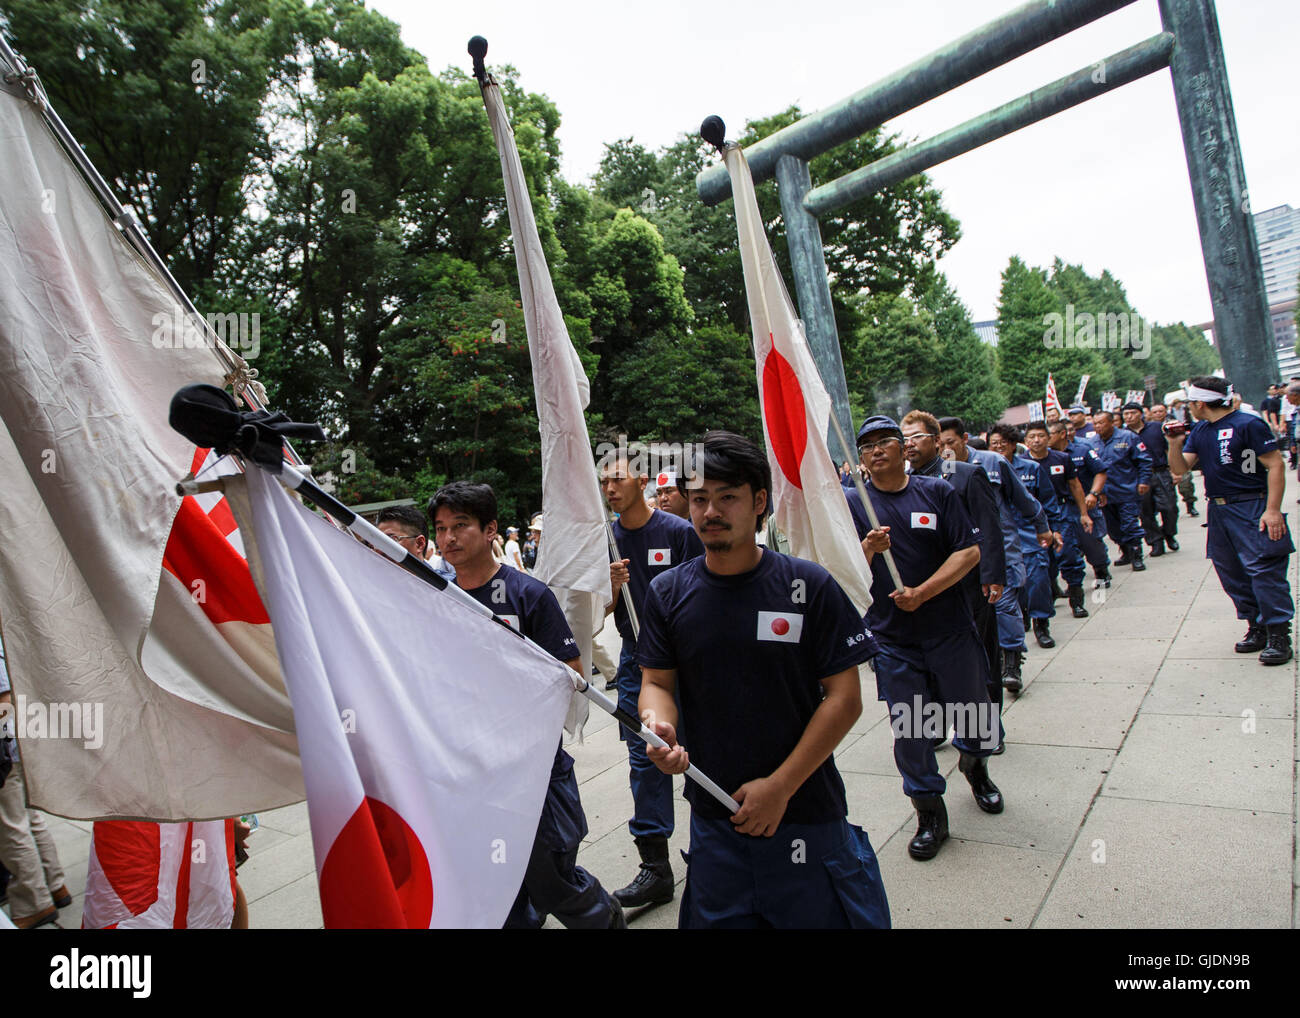 Tokyo, Japan. 15th Aug, 2016. Japanese nationalists march into Yasukuni Shrine to pay respects to the war dead on August 15, 2016, during the 71st anniversary of Japan's surrender of World War II. Yasukuni enshrines the war dead including convicted war criminals. Credit:  AFLO/Alamy Live News Stock Photo